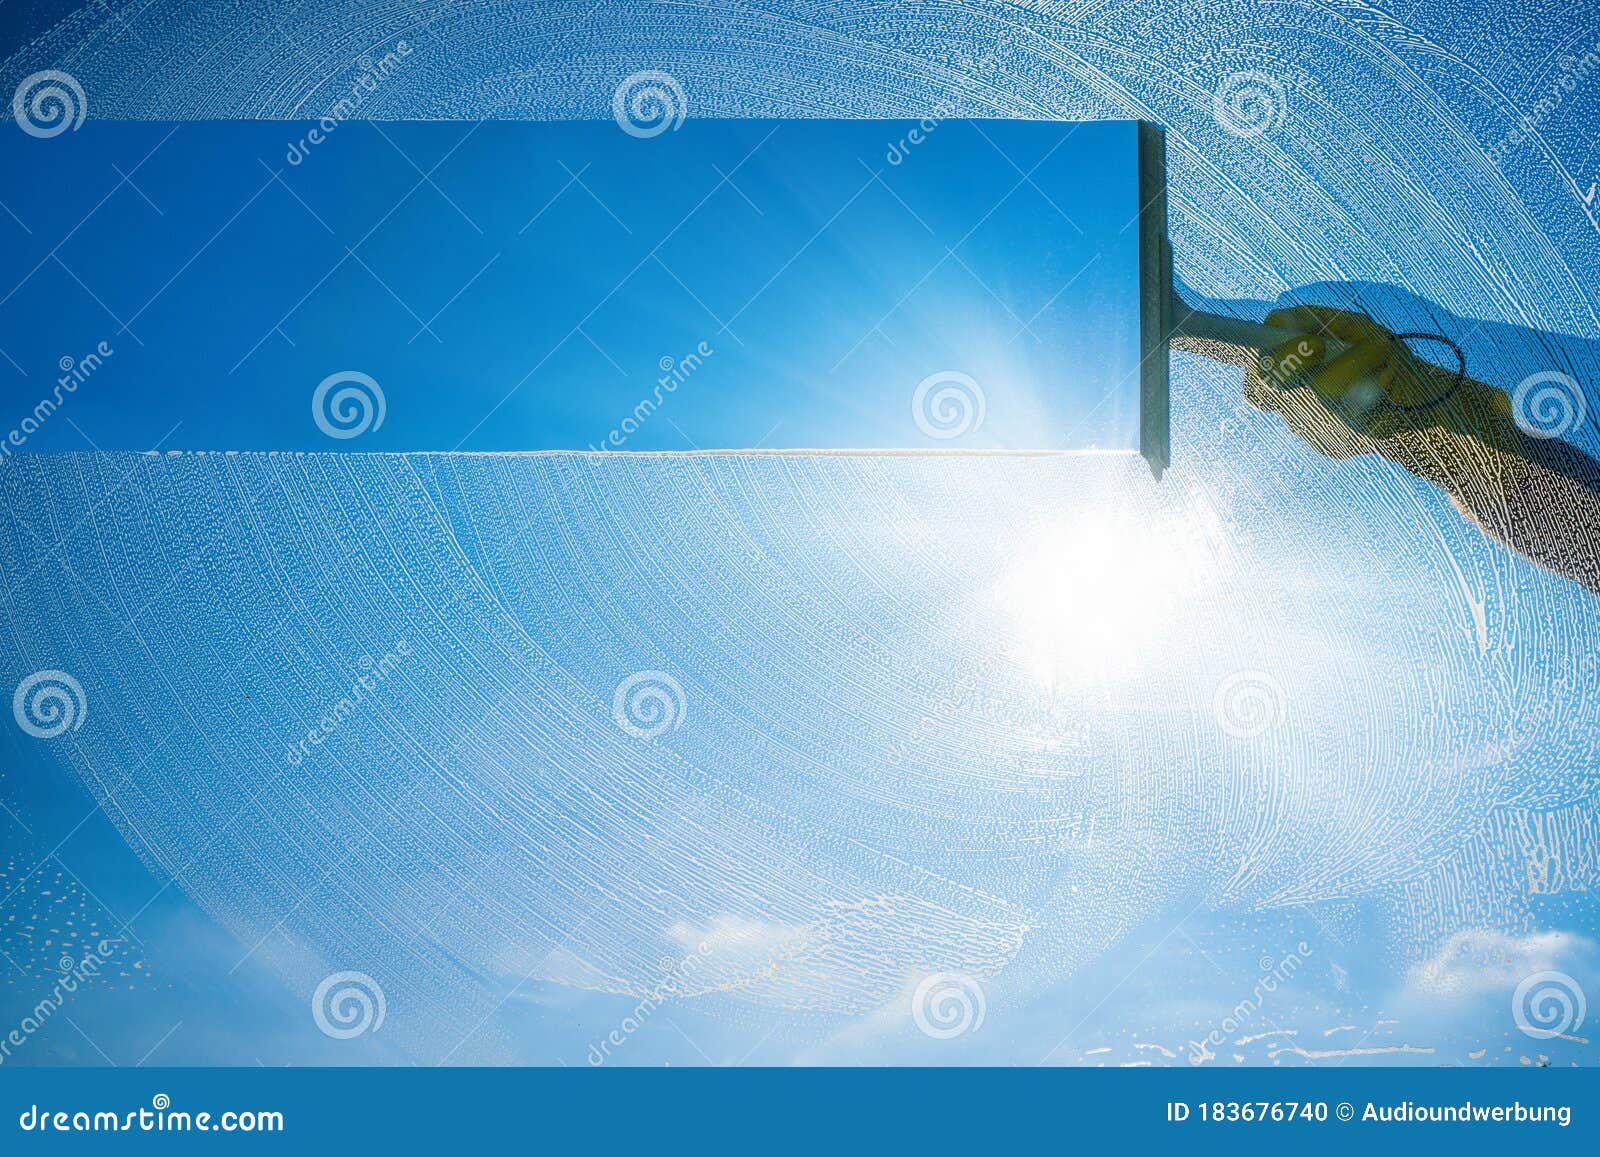 window cleaner cleaning window with squeegee and wiper on a sunny day with a bright blue sky